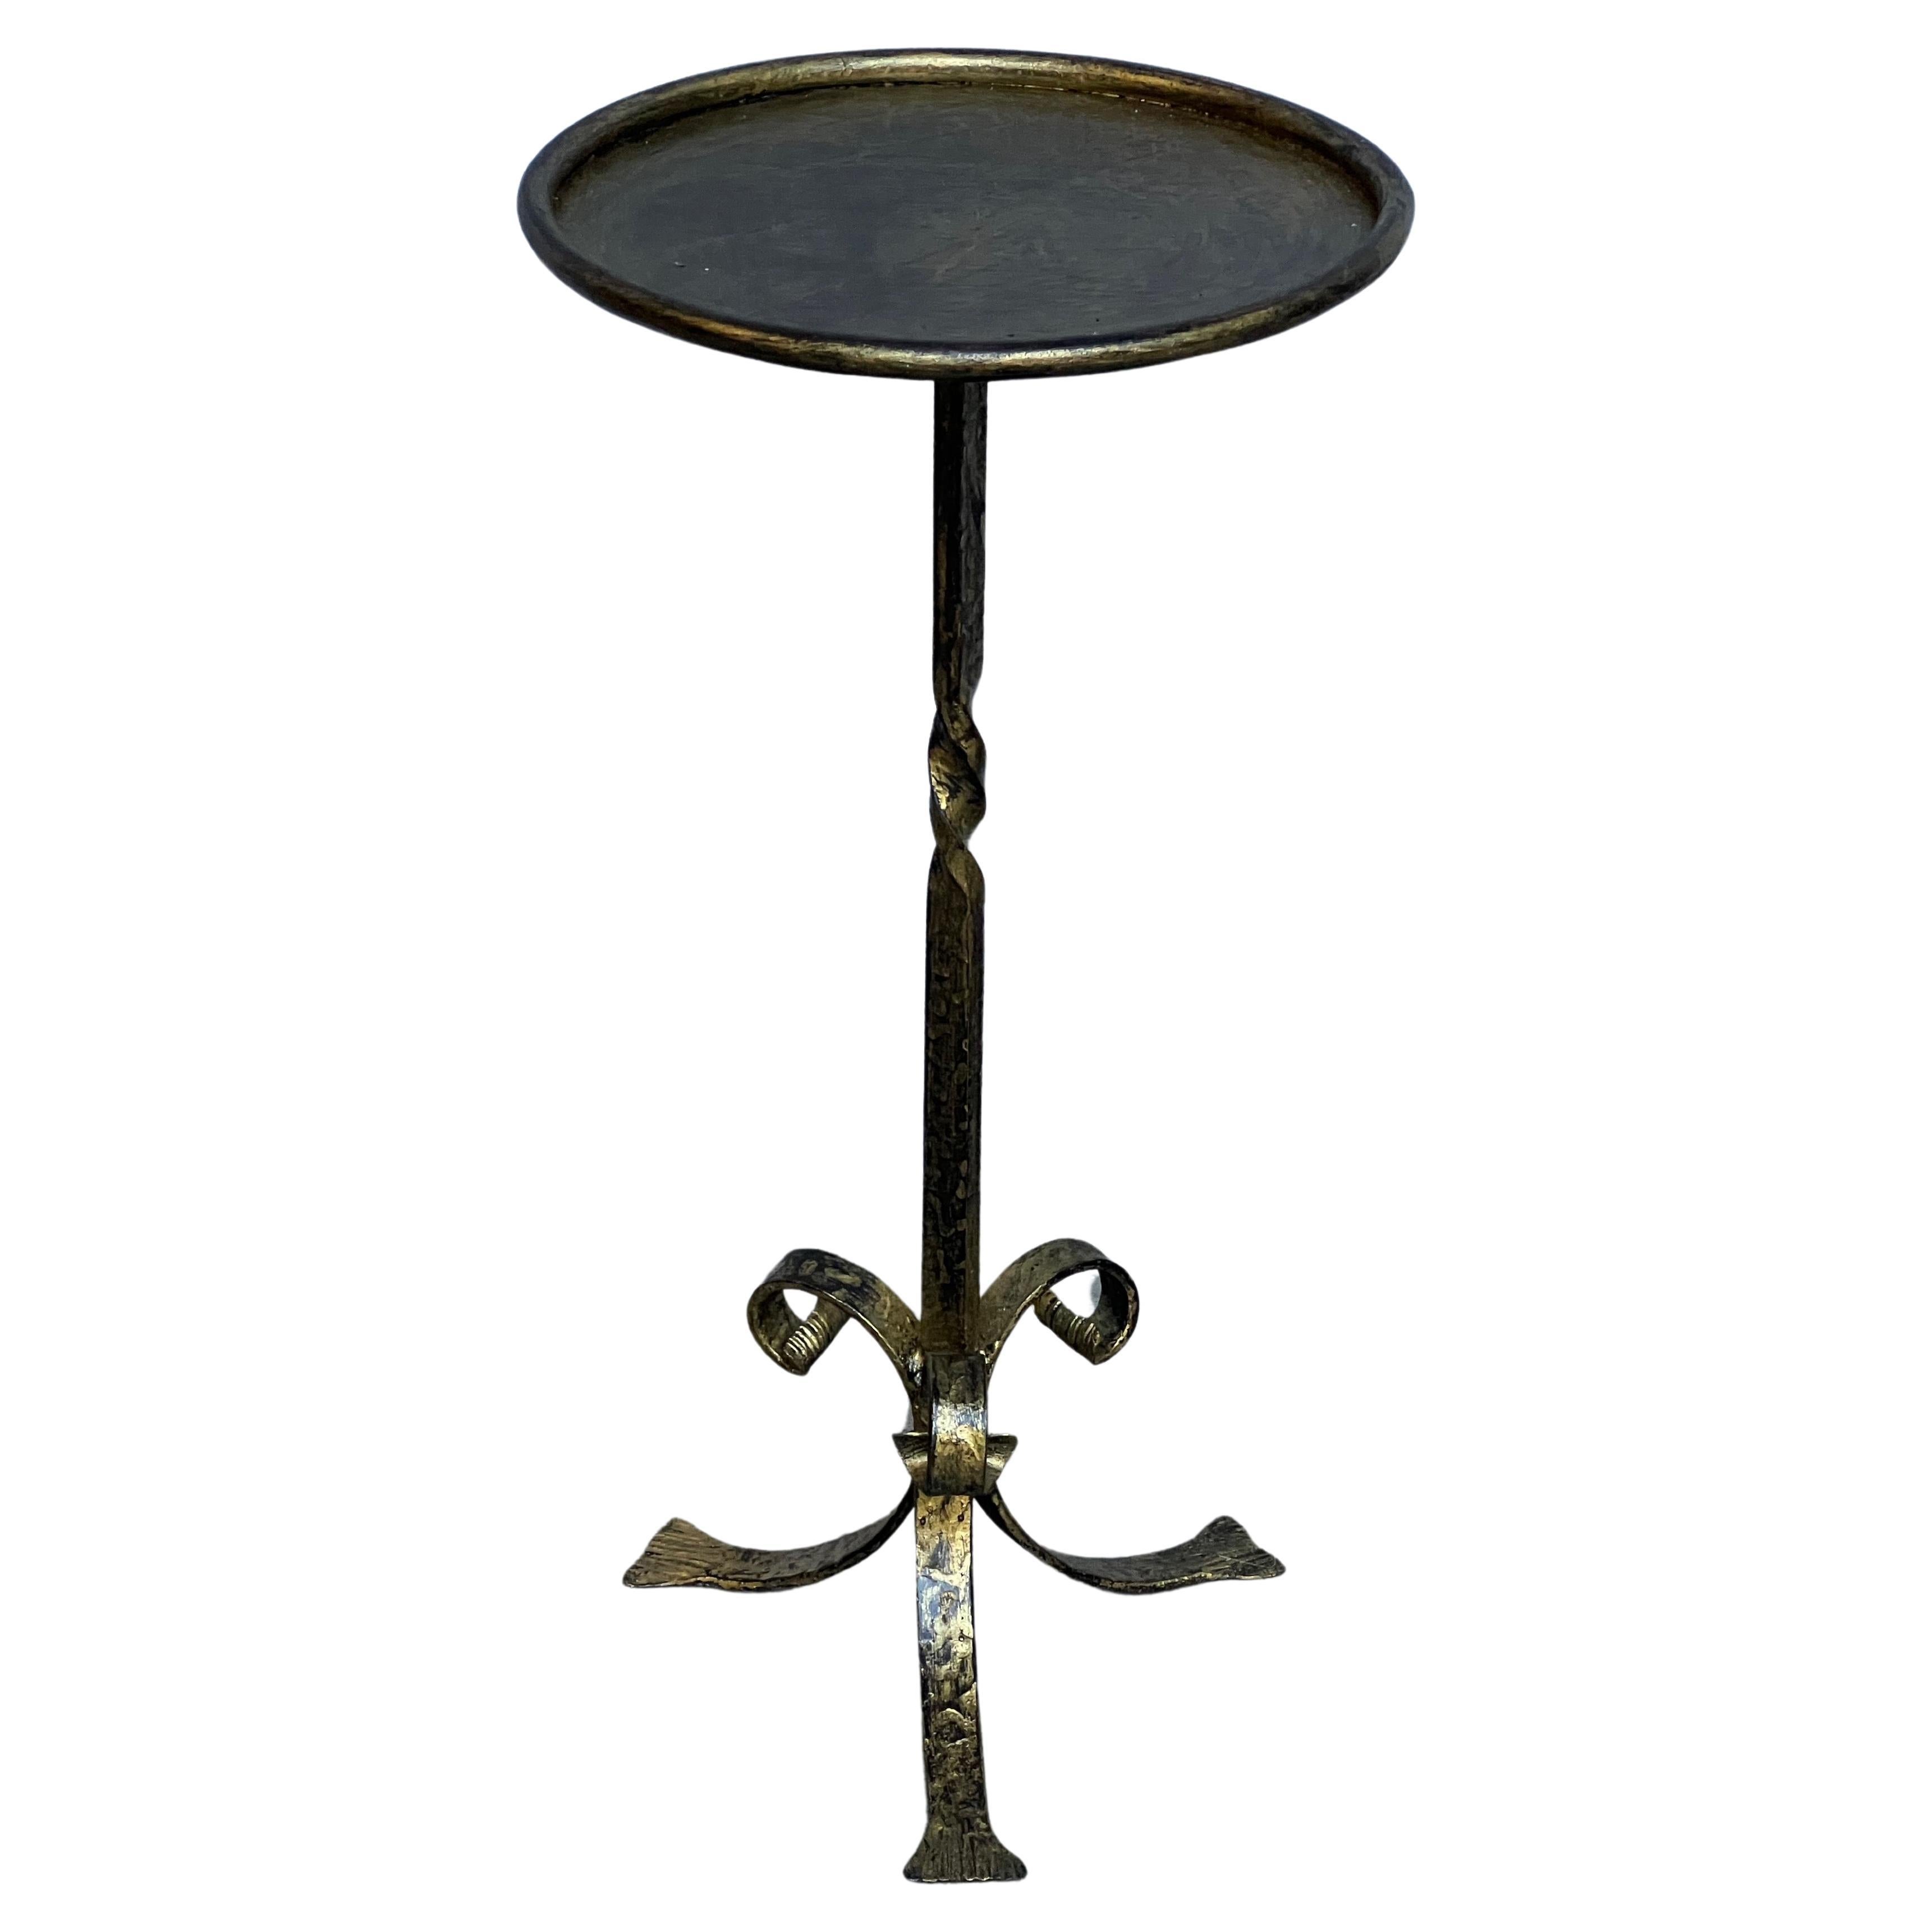 Spanish Gilt Iron Drinks Table with Scrolled Tripod Base